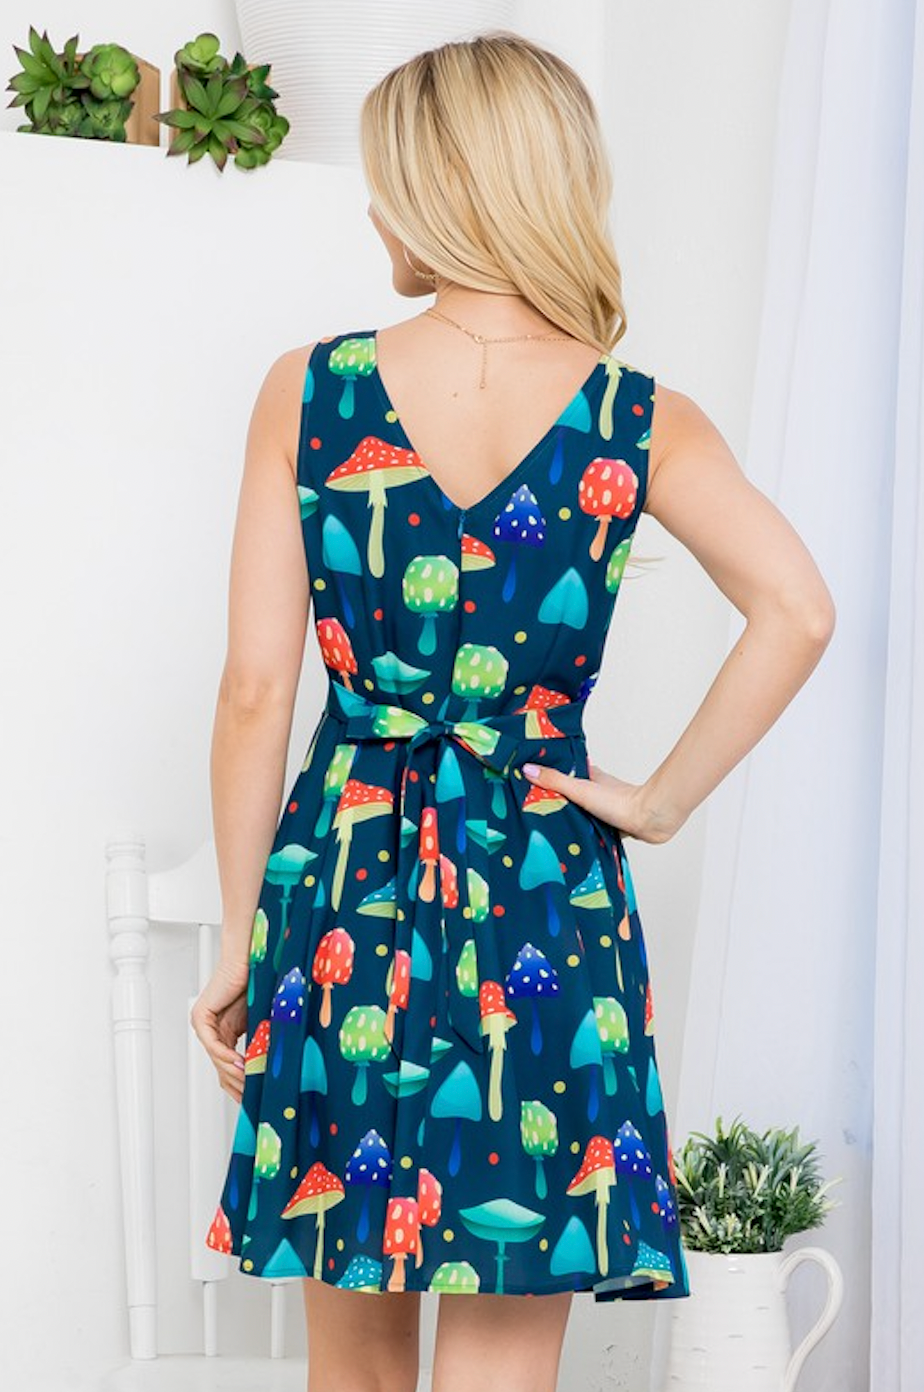 COLORFUL MUSHROOM PRINT DRESS WITH POCKET AND TIE BACK